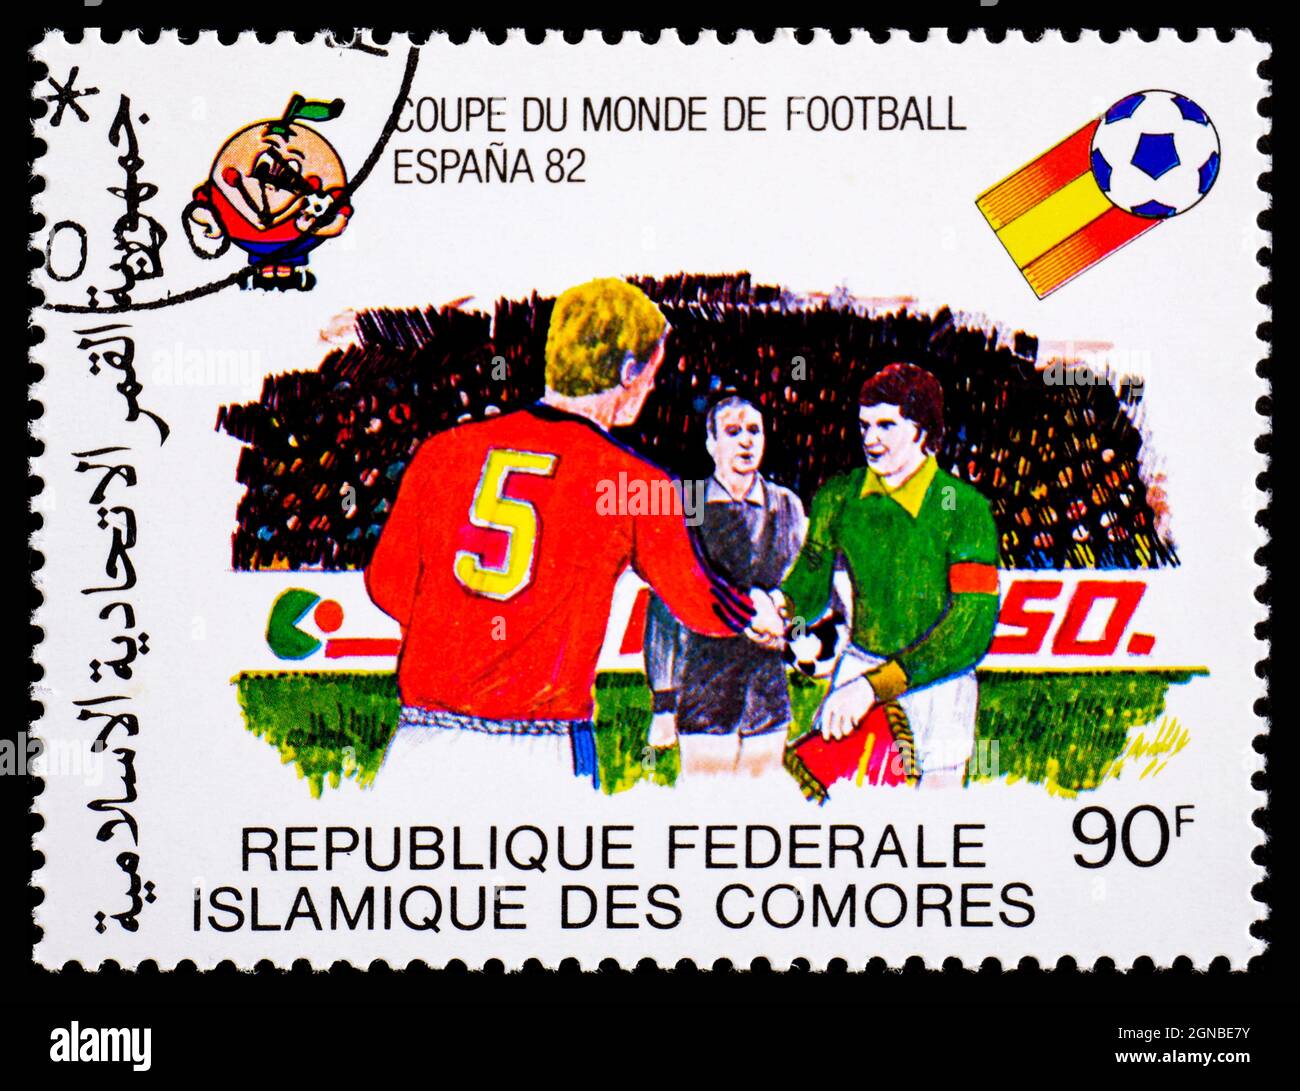 SPAIN - CIRCA 1982: A postage stamp from Spain showing Coupe Du Monde De Football Espana 1982 Stock Photo